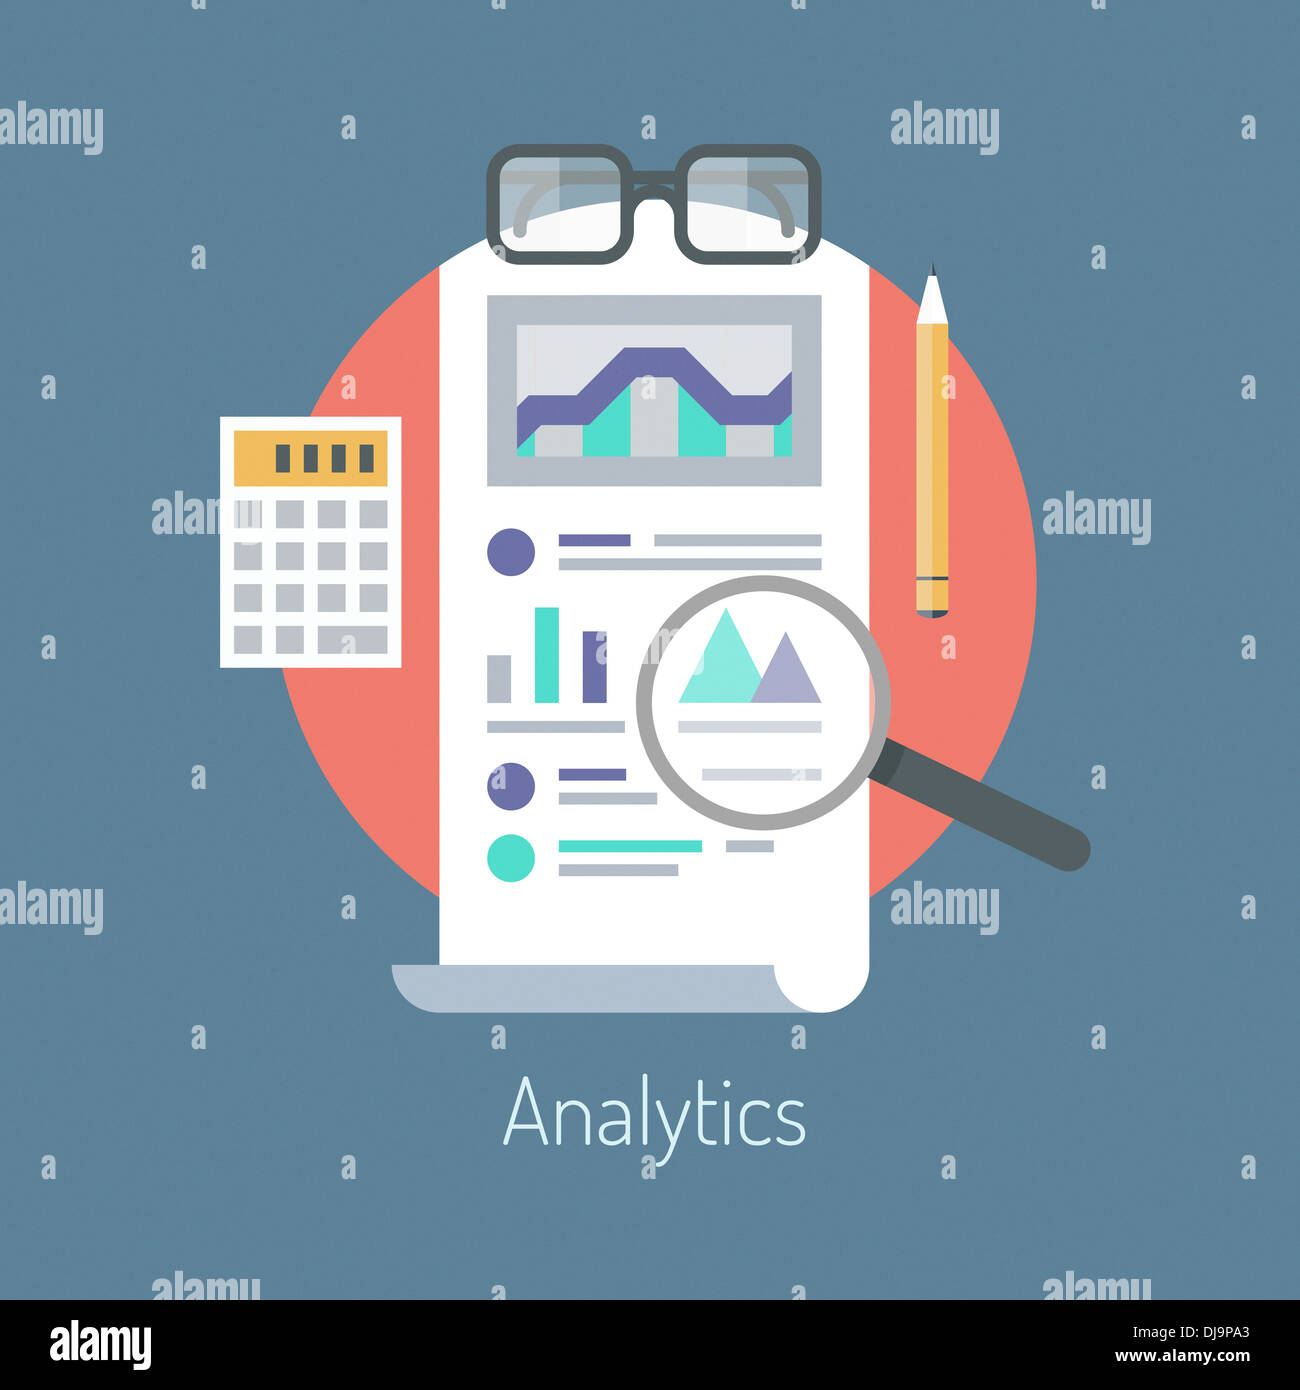 Flat design modern illustration concept of poster on analytics research information and website data statistics Stock Photo